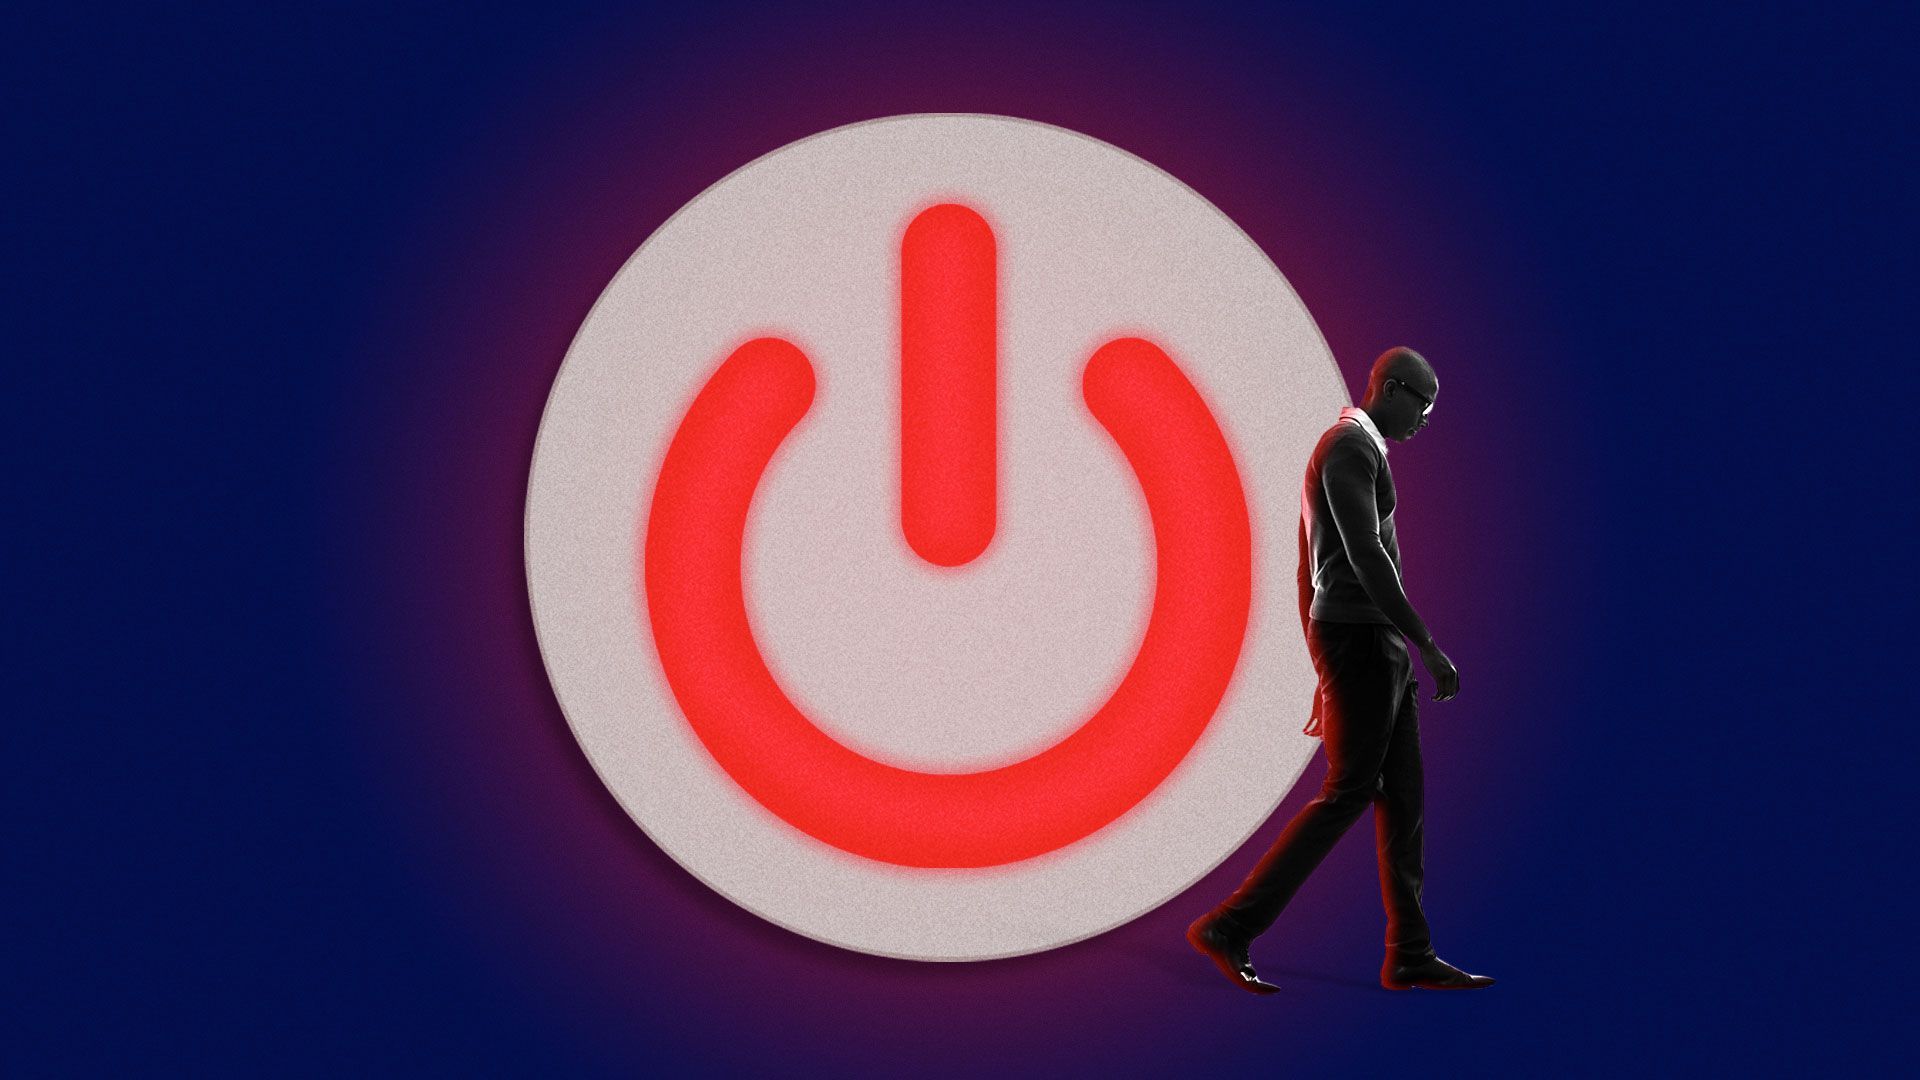 Illustration of a glowing power button casting a glowing light on a Black person